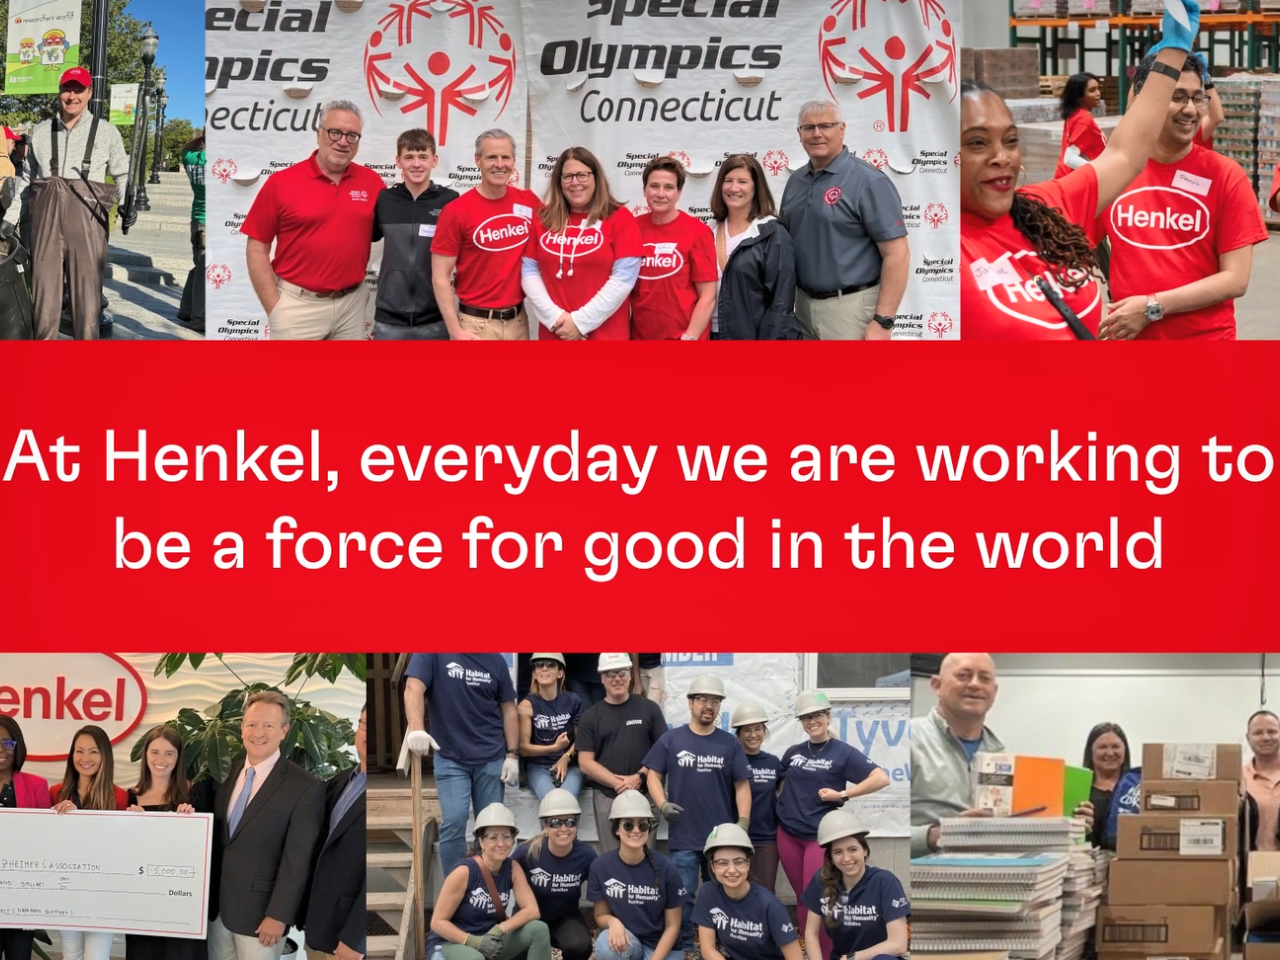 Collage of volunteers doing different tasks. "At Henkel, everyday we are working to be a force for good in the world."